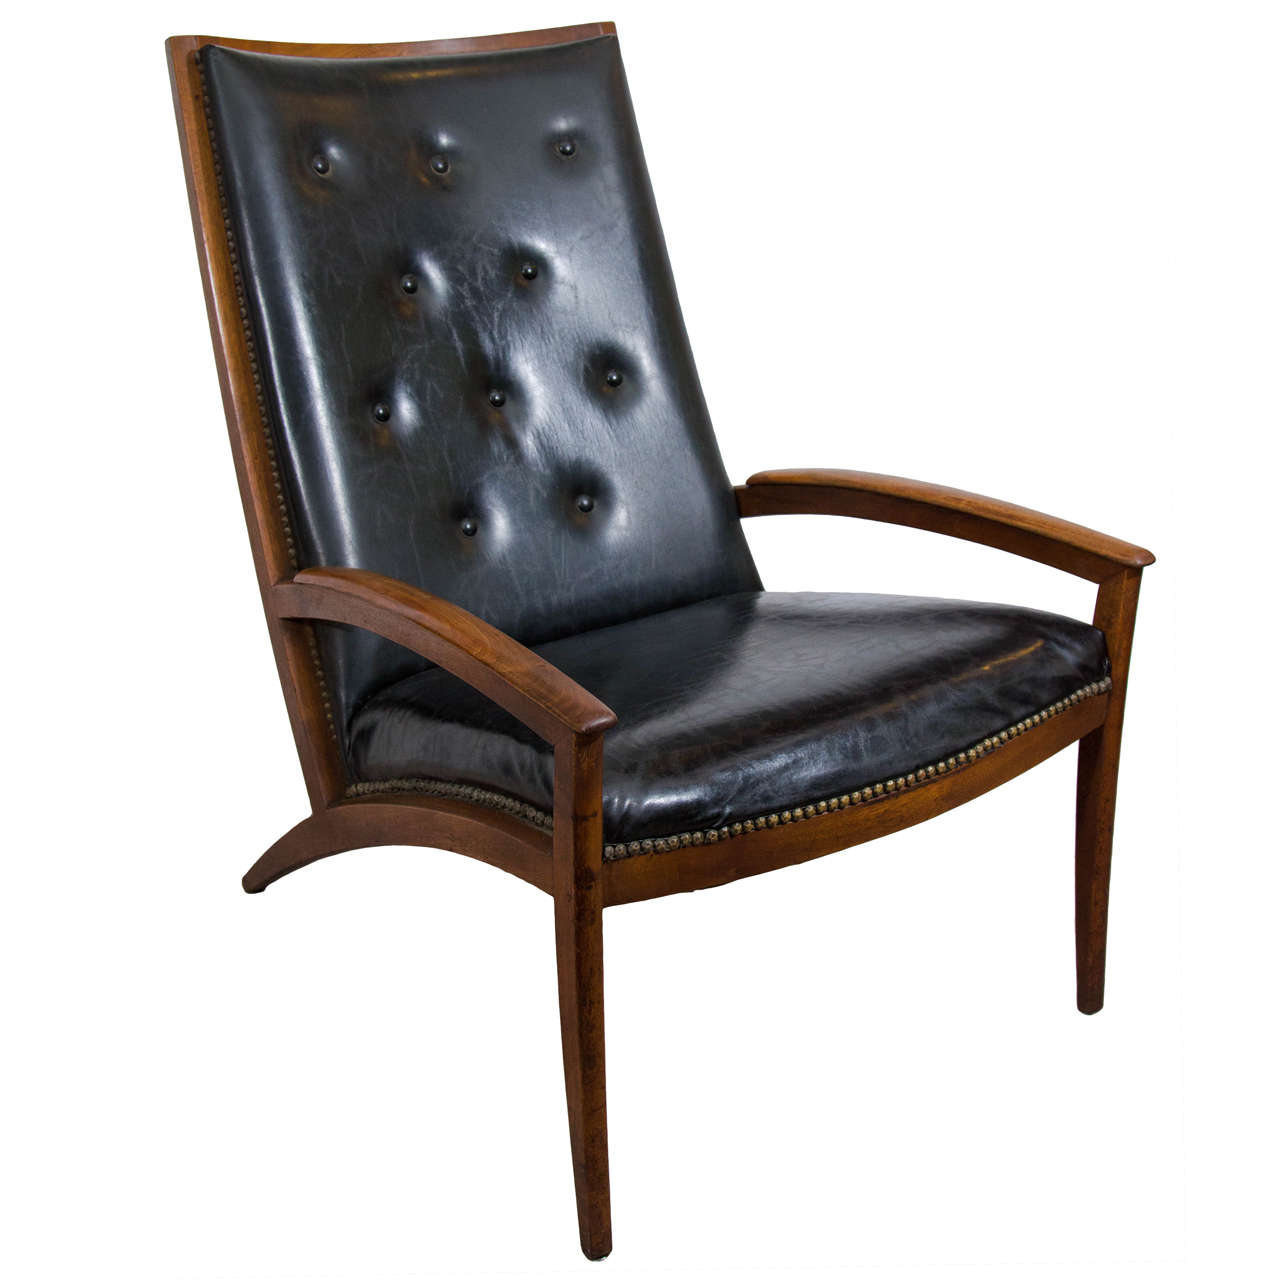 Midcentury Parallel Group Chair by Barney Flagg for Drexel